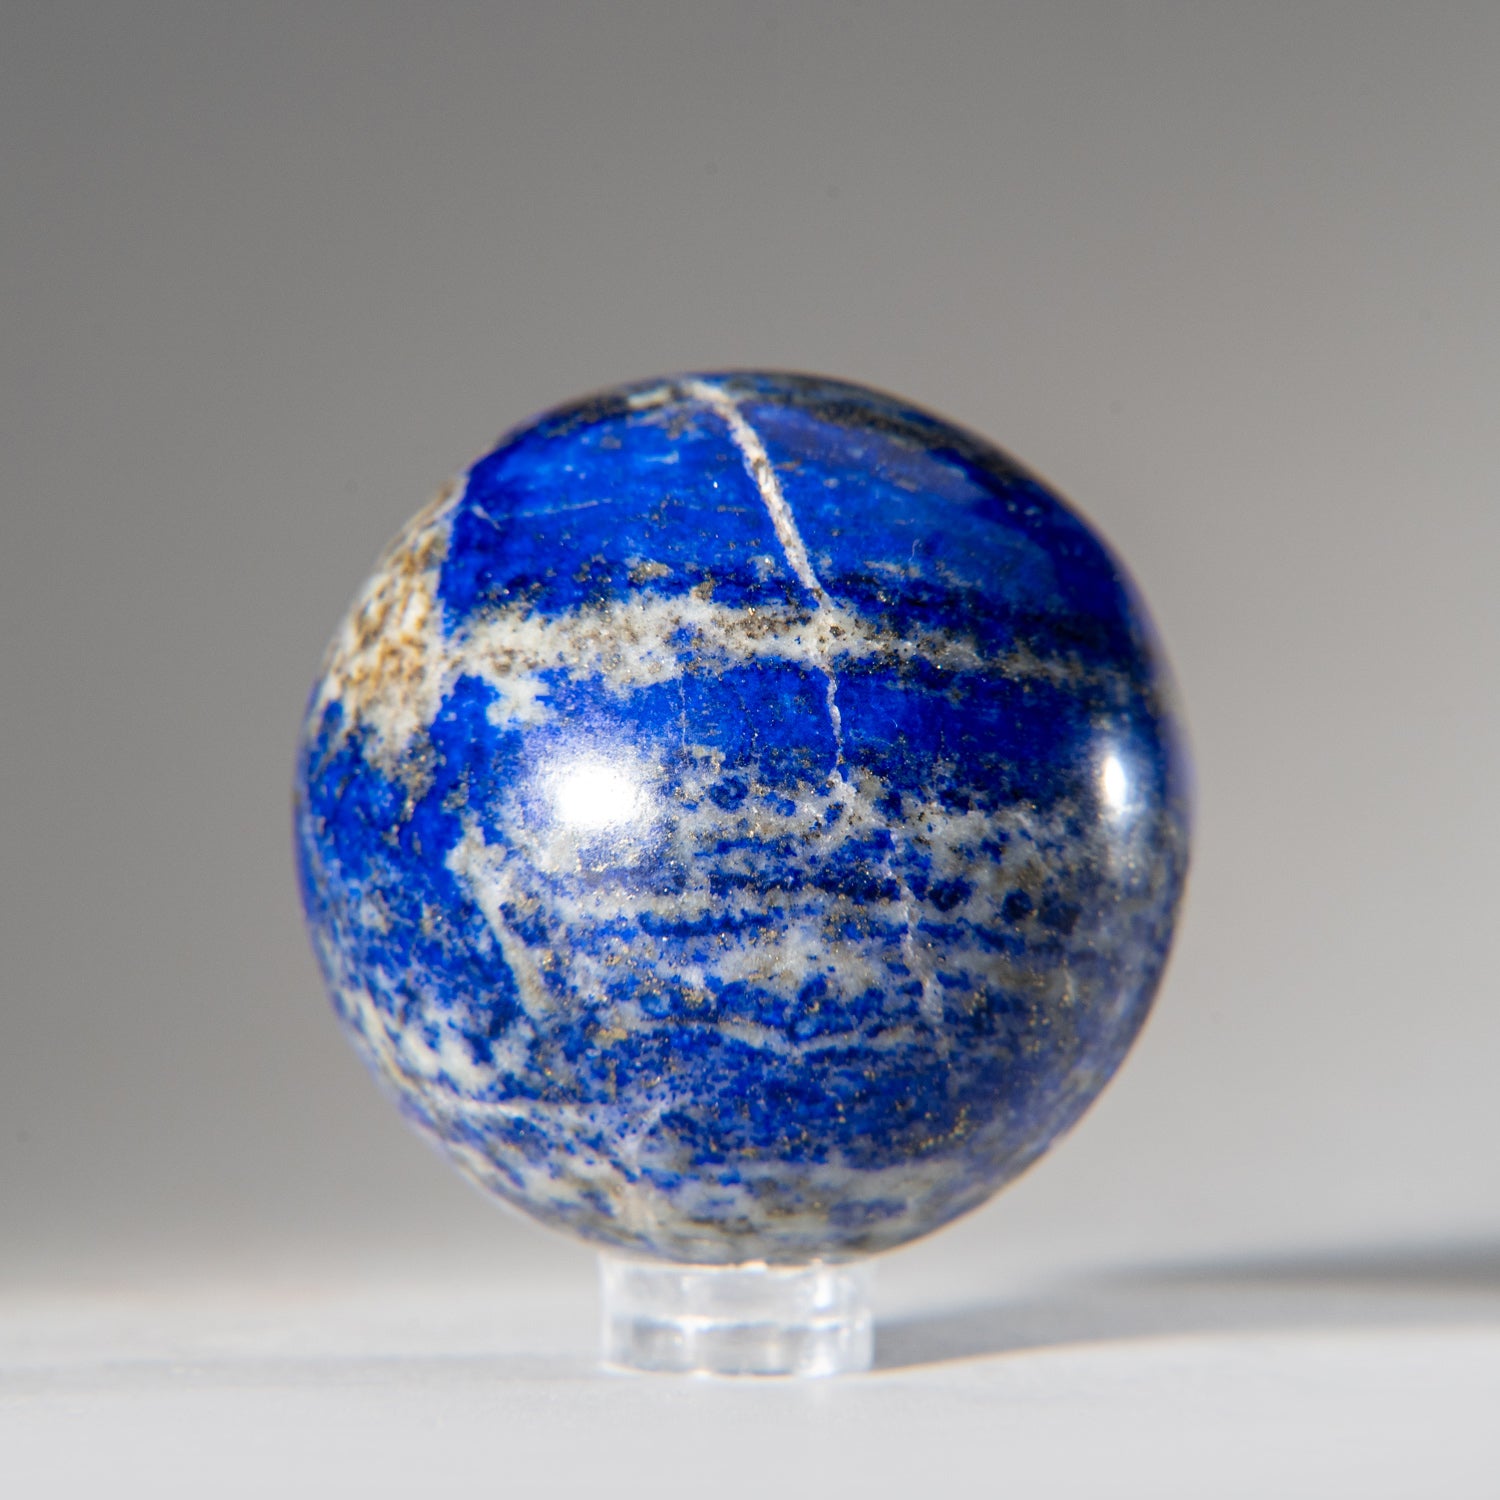 Genuine Polished Lapis Lazuli (2") Sphere from Afghanistan